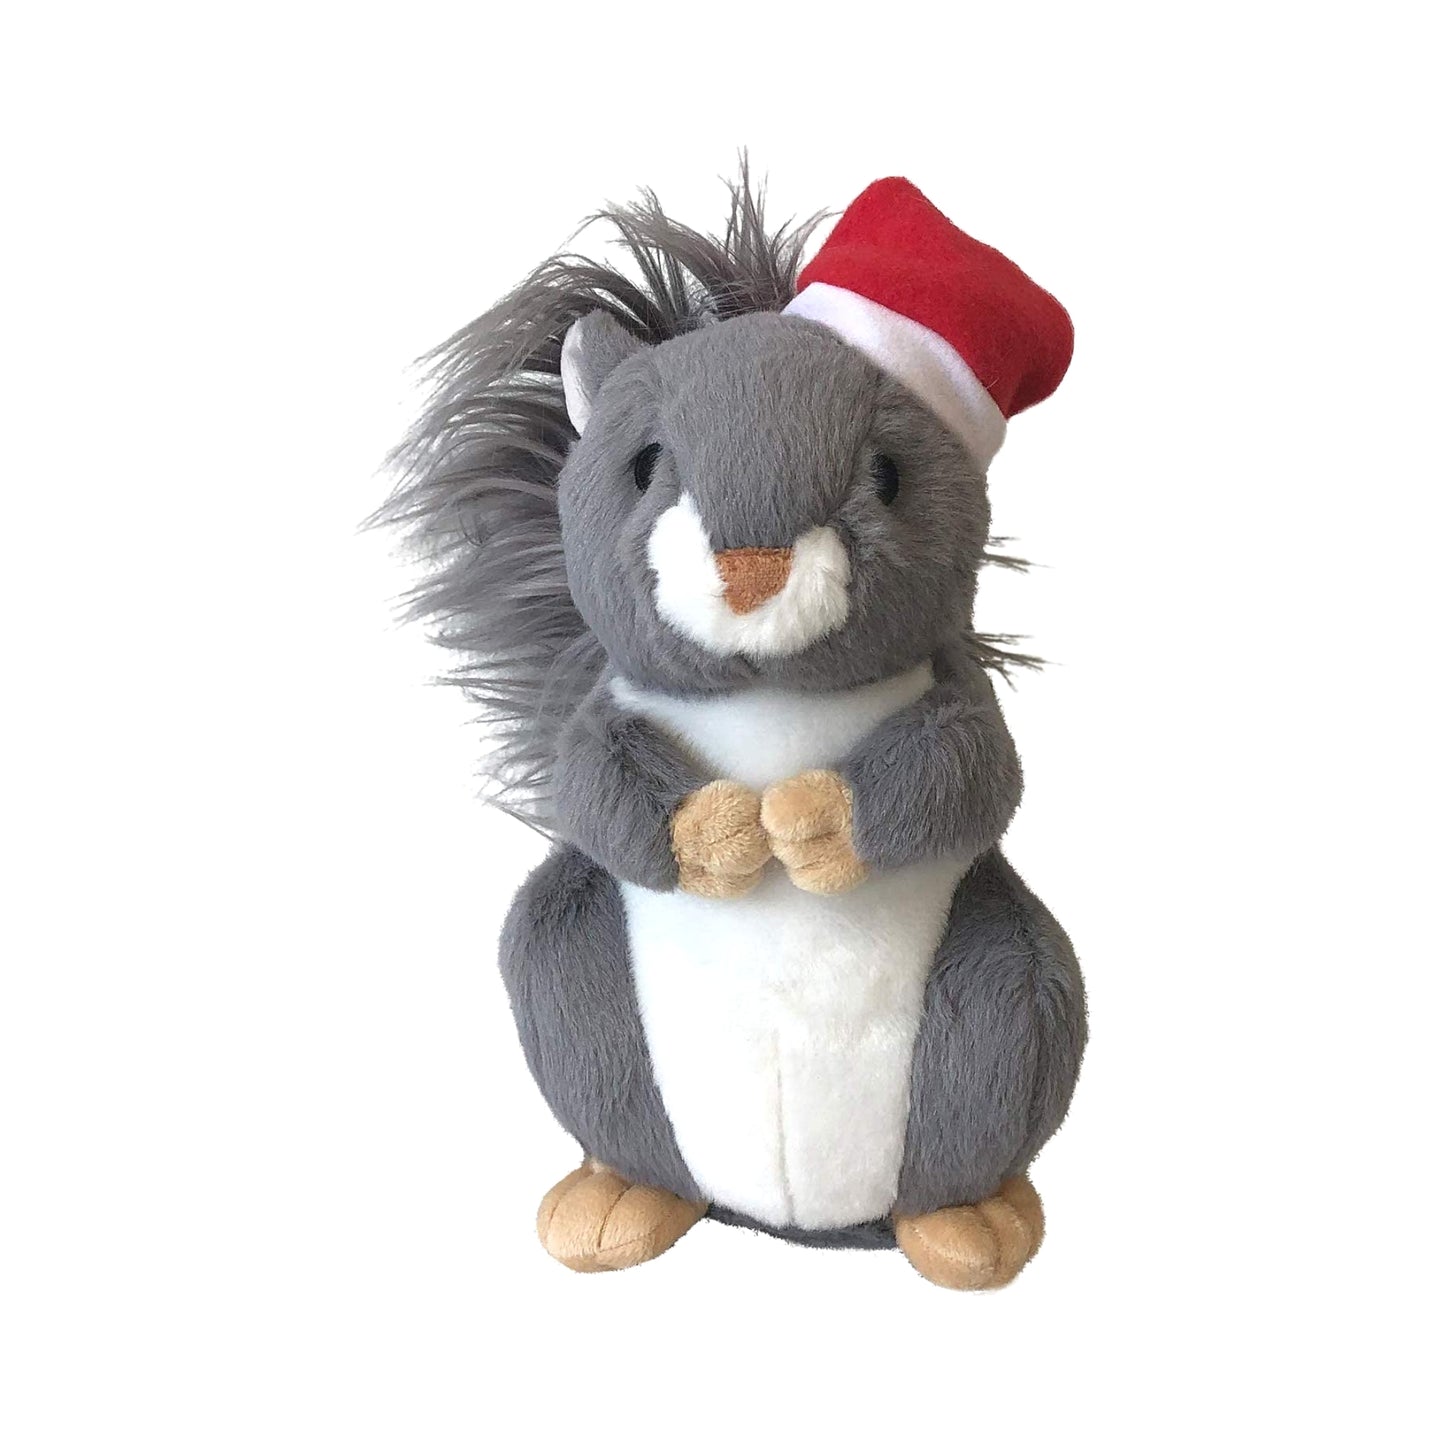 Midlee Christmas Squirrel Plush Furry Tail Large Dog Toy with Santa Hat - 9"- Squeaker Stuffed Holiday Gift